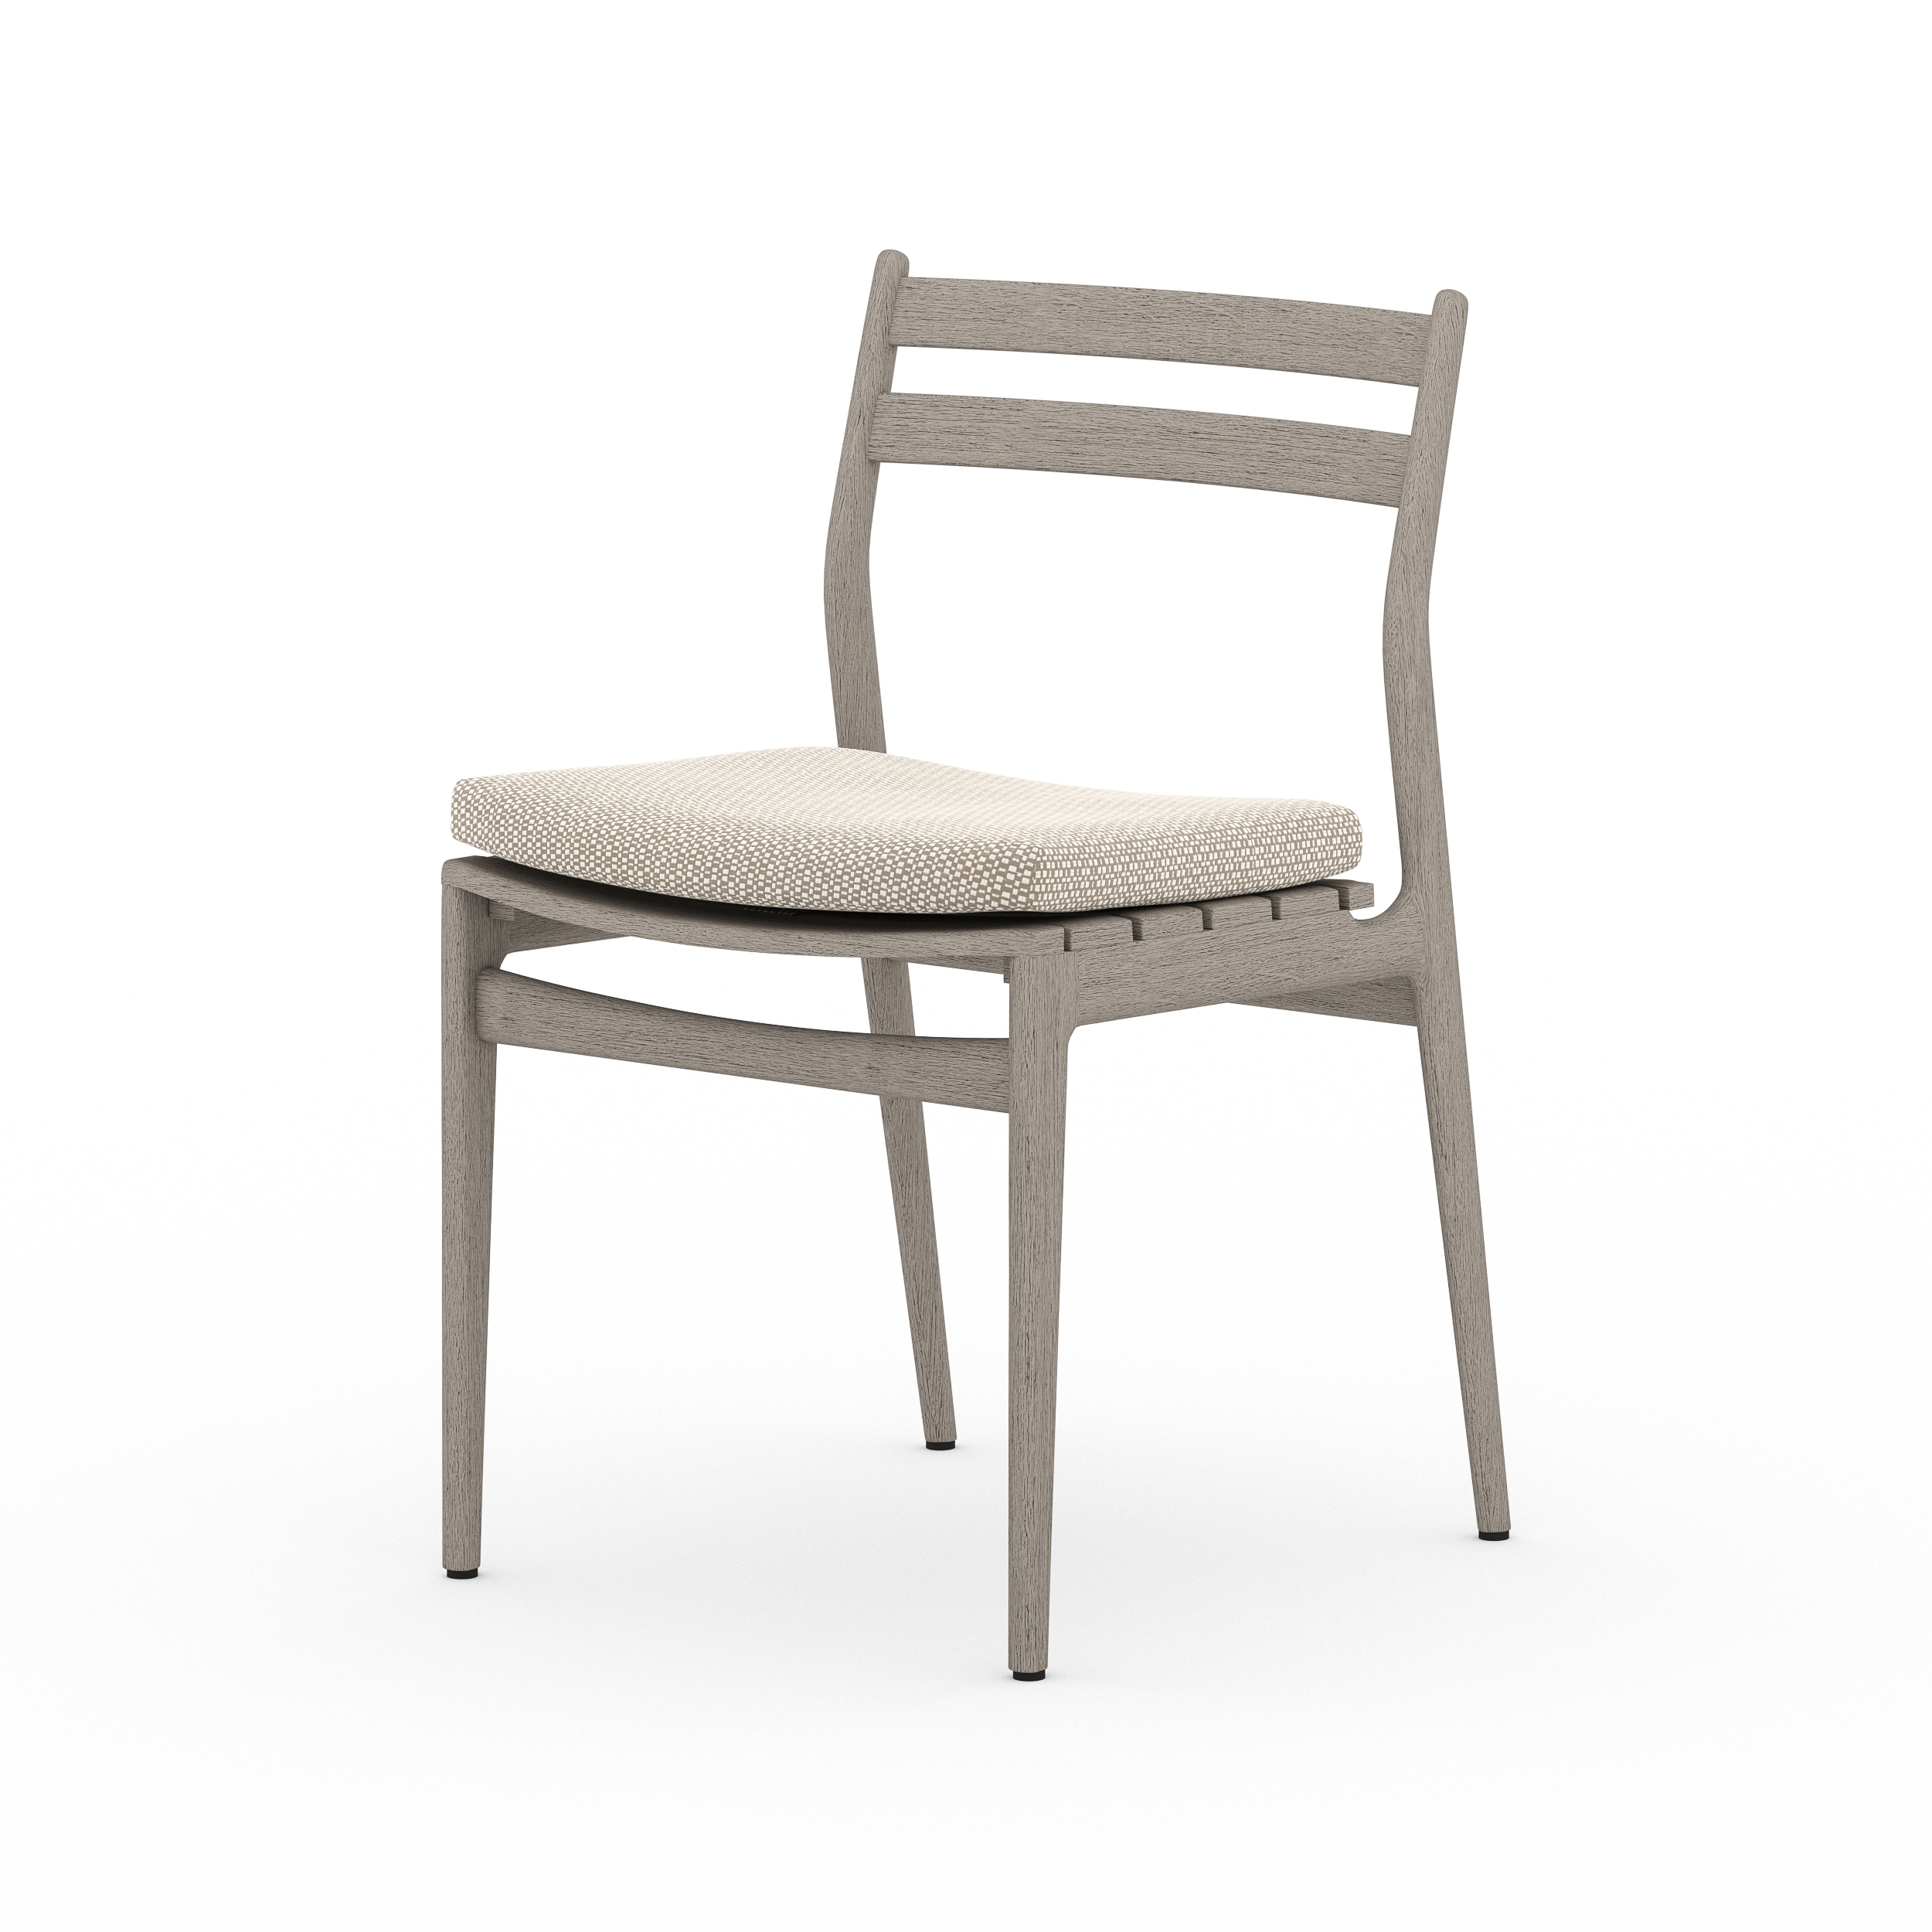 Atherton Weathered Gray Outdoor Dining Chair